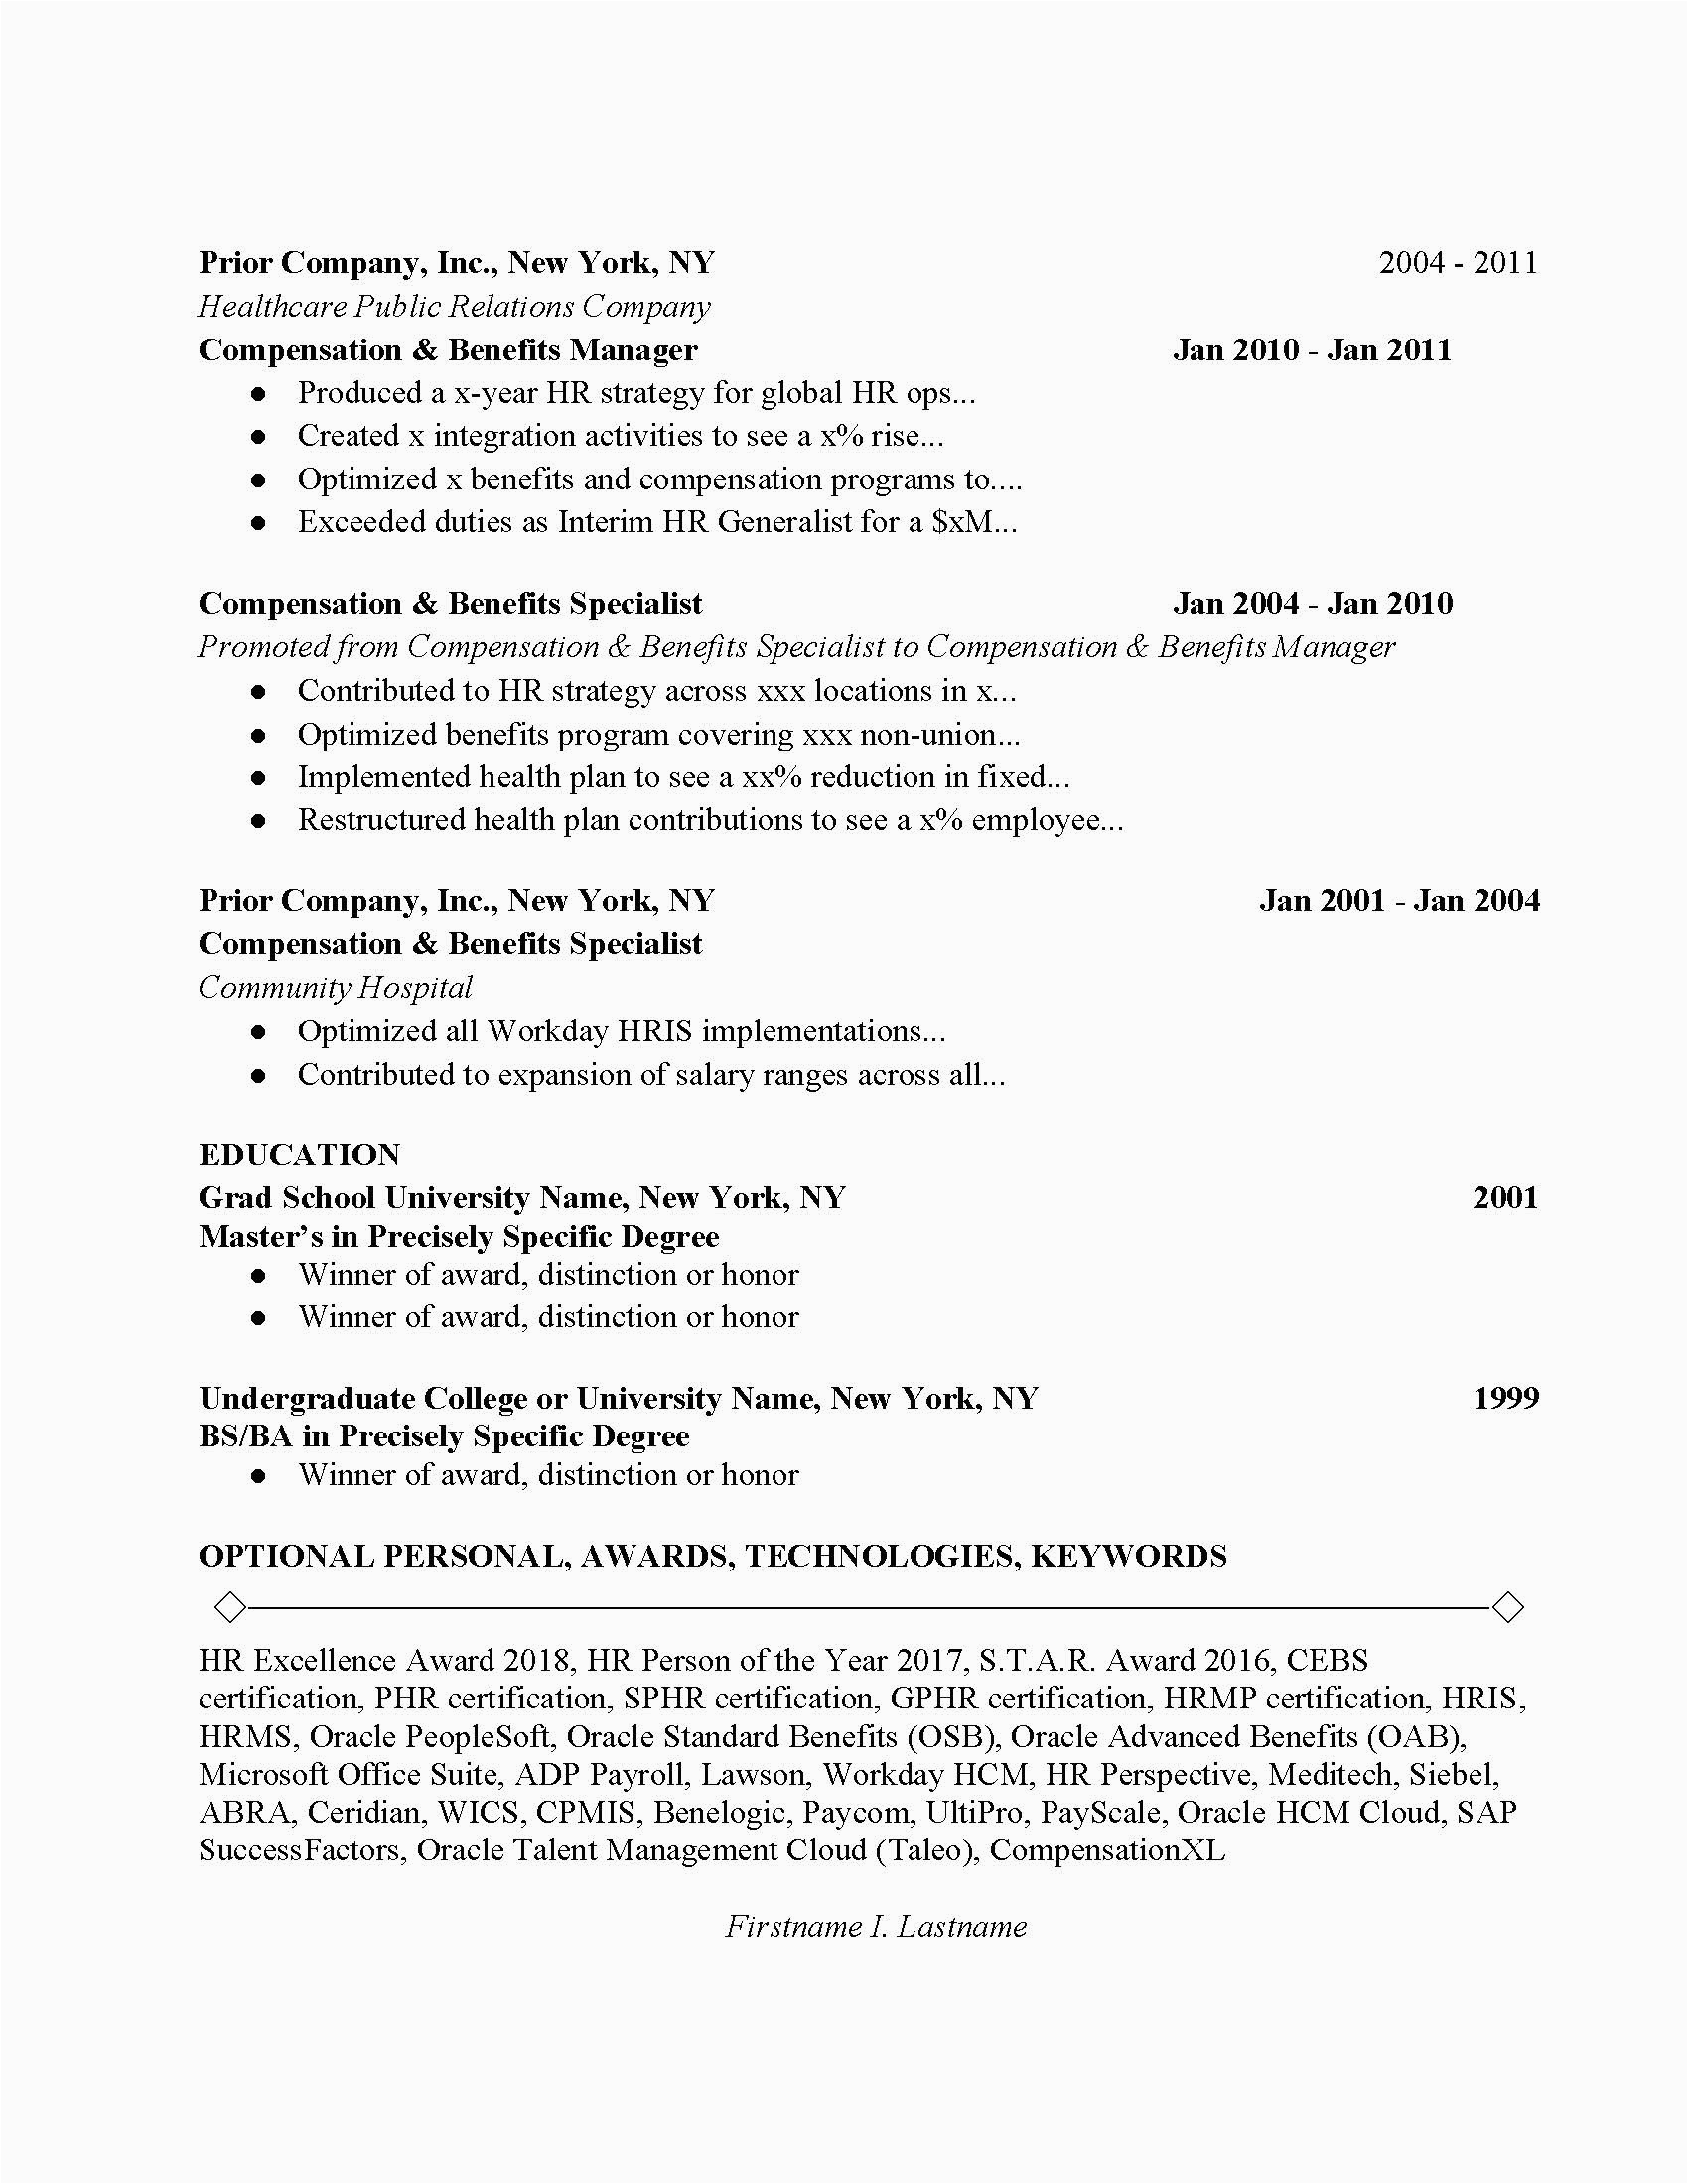 Compensation and Benefits Manager Resume Sample Pensation and Benefits Manager Resume Example